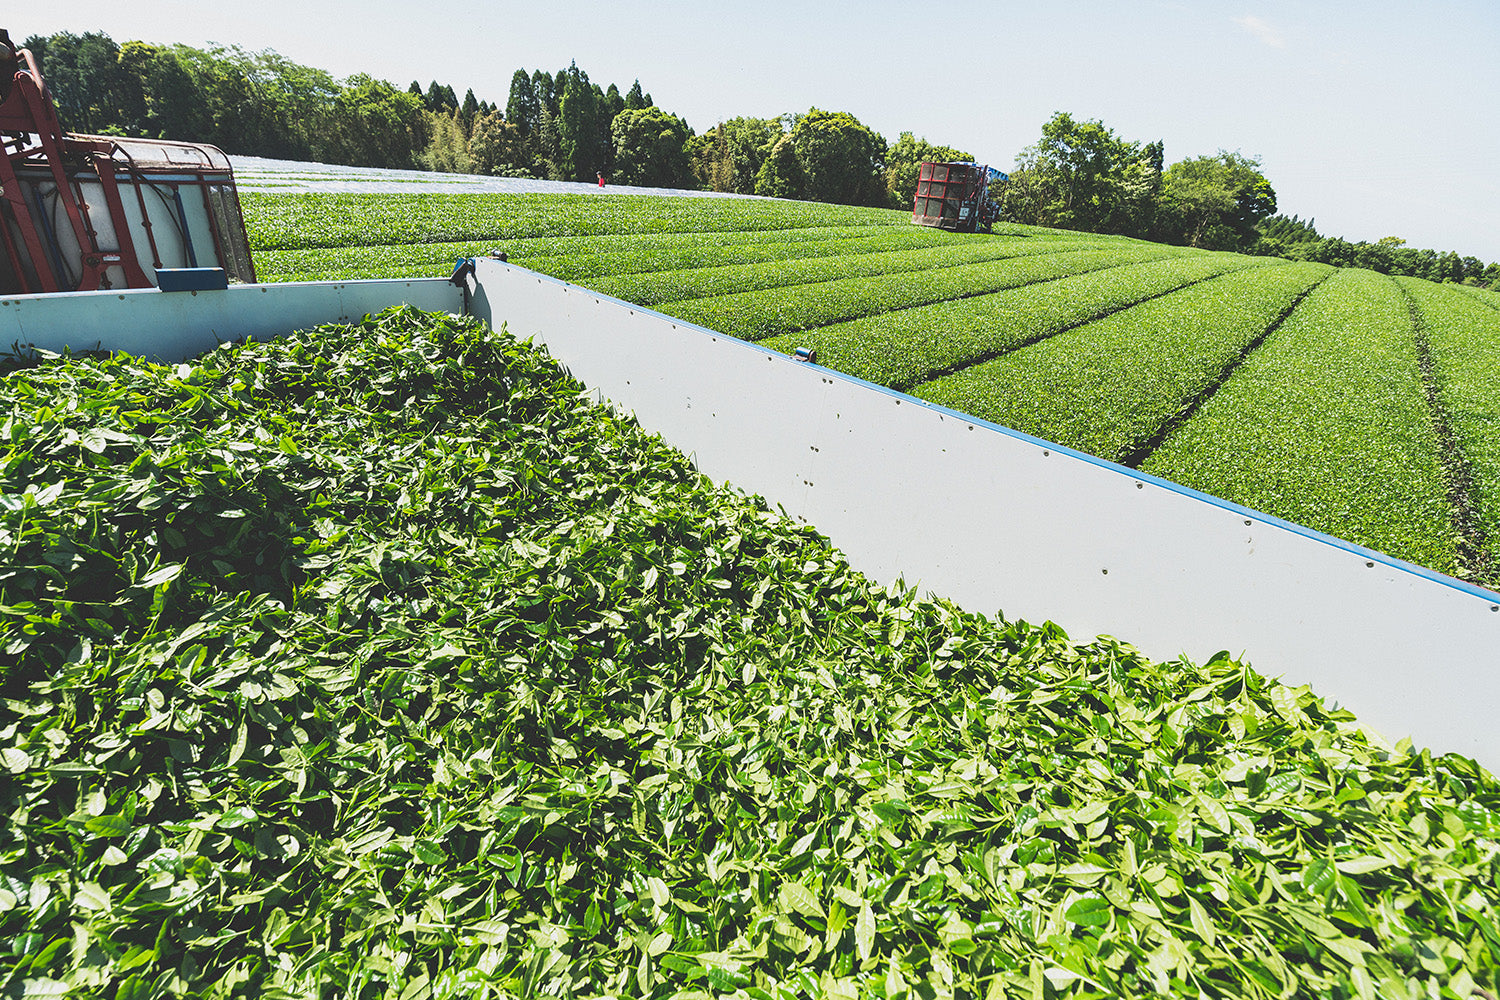 A large container full of tencha leaves. Rows of tea plants stretch into the horizon on the Kagoshima tea farm.